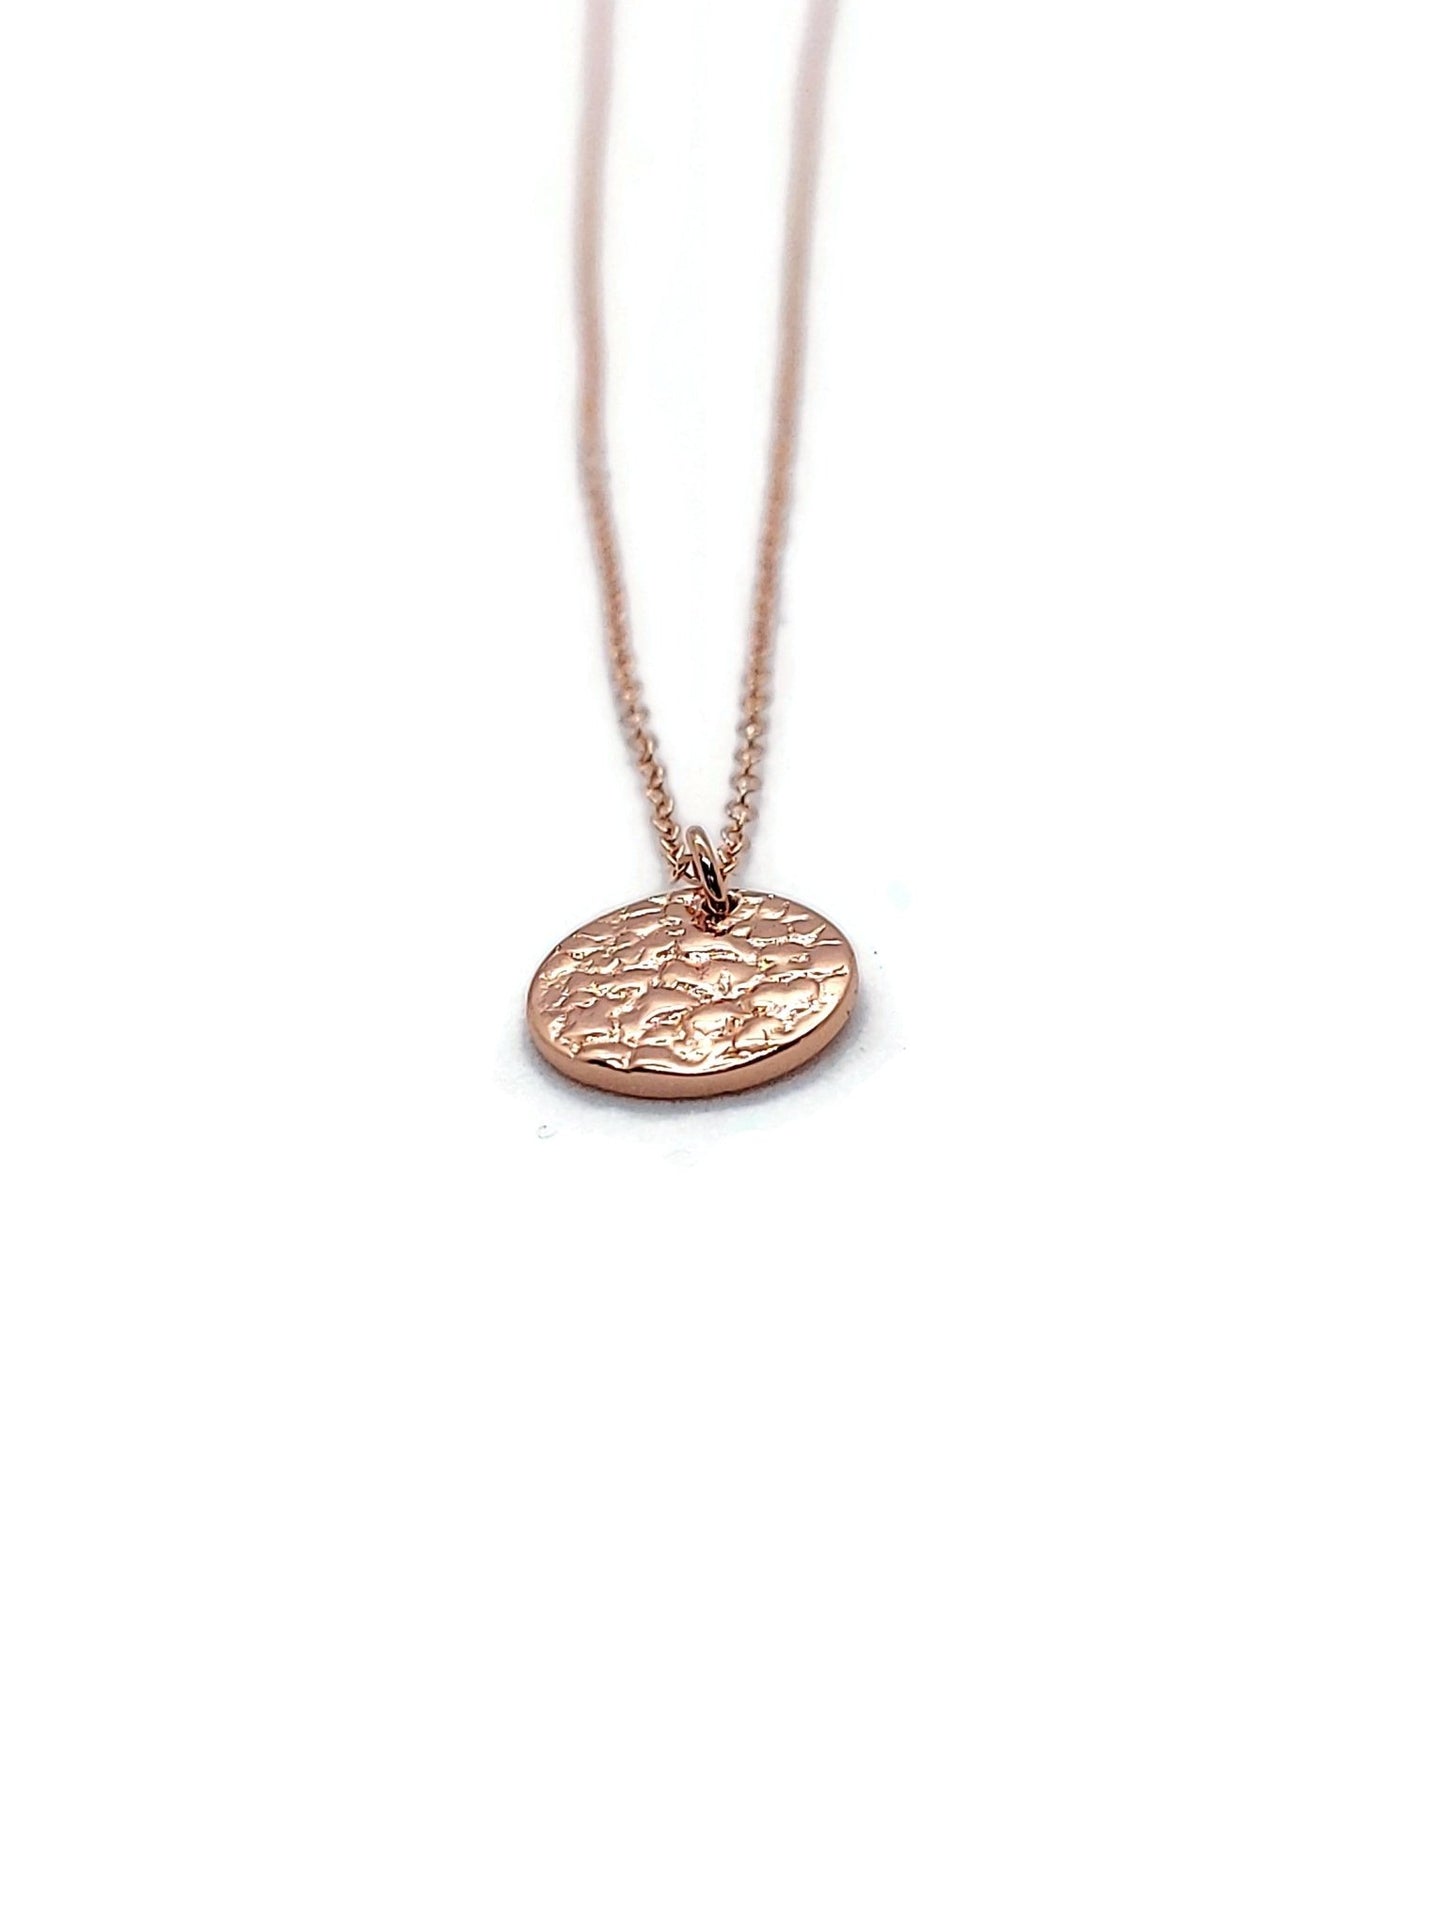 18k rose gold Plated  Sol Textured Small Circle Pendant Necklace on white background